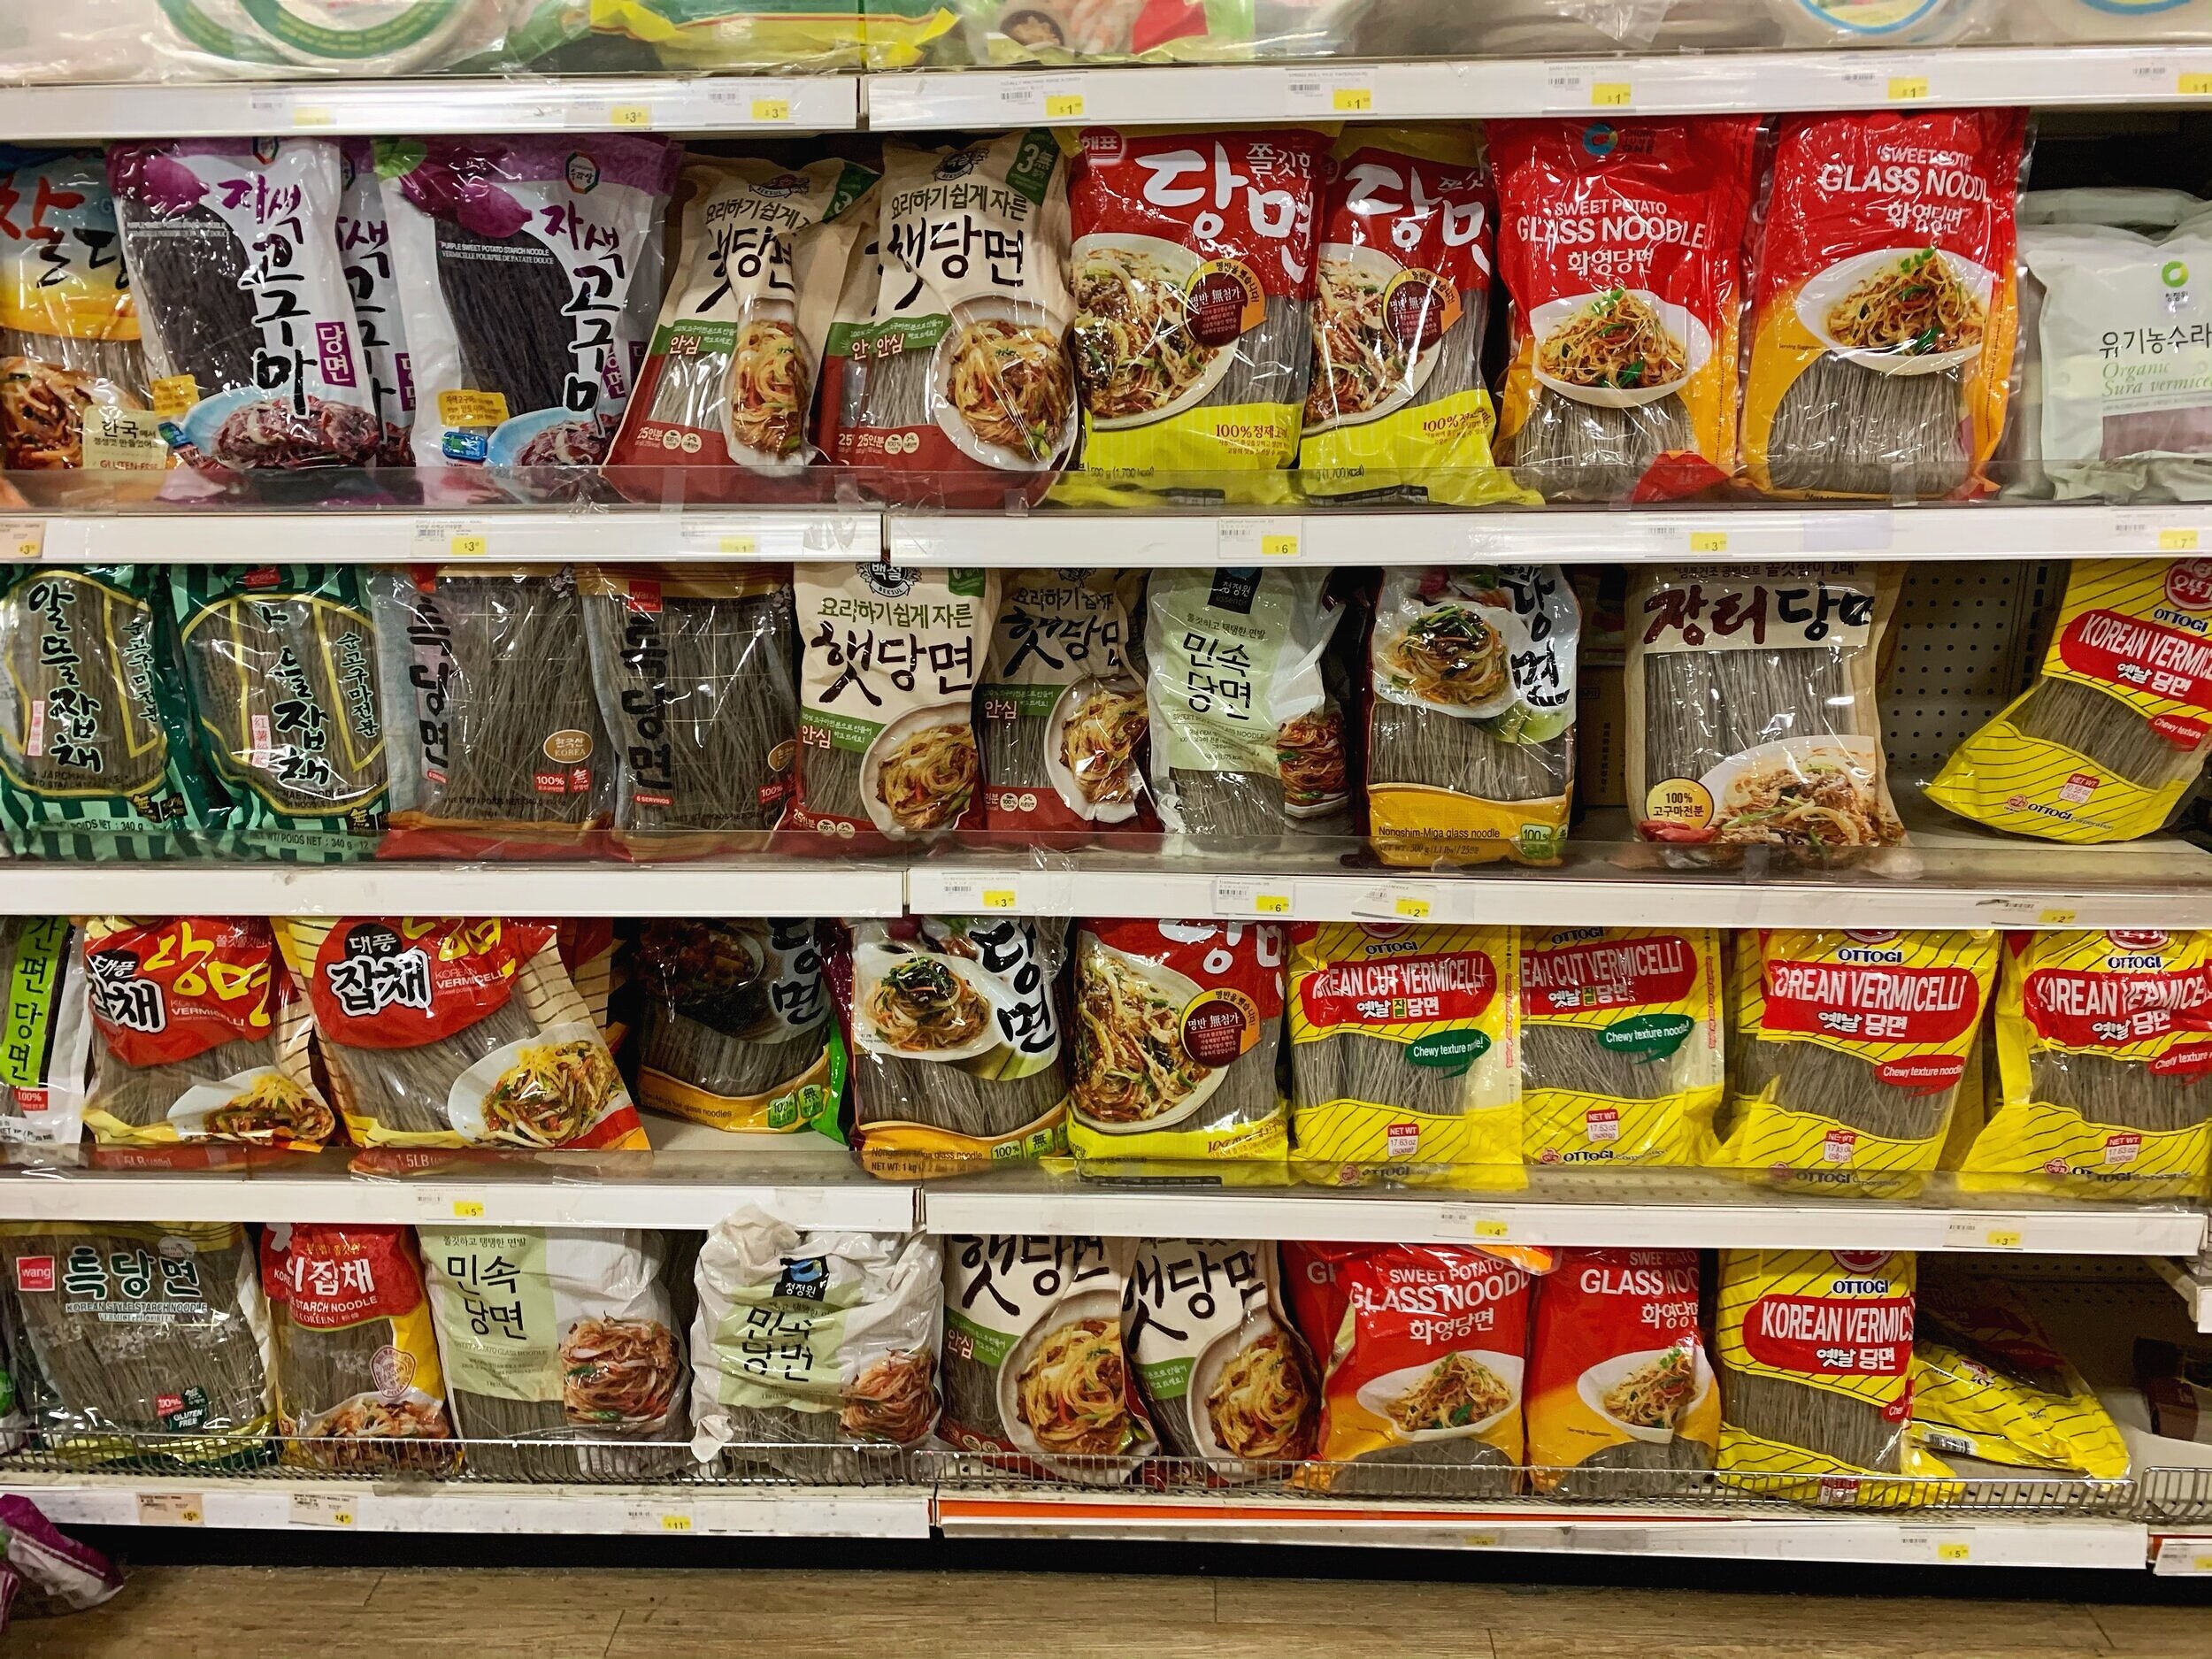 Aisle of Korean Glass Noodles at Korean grocery store